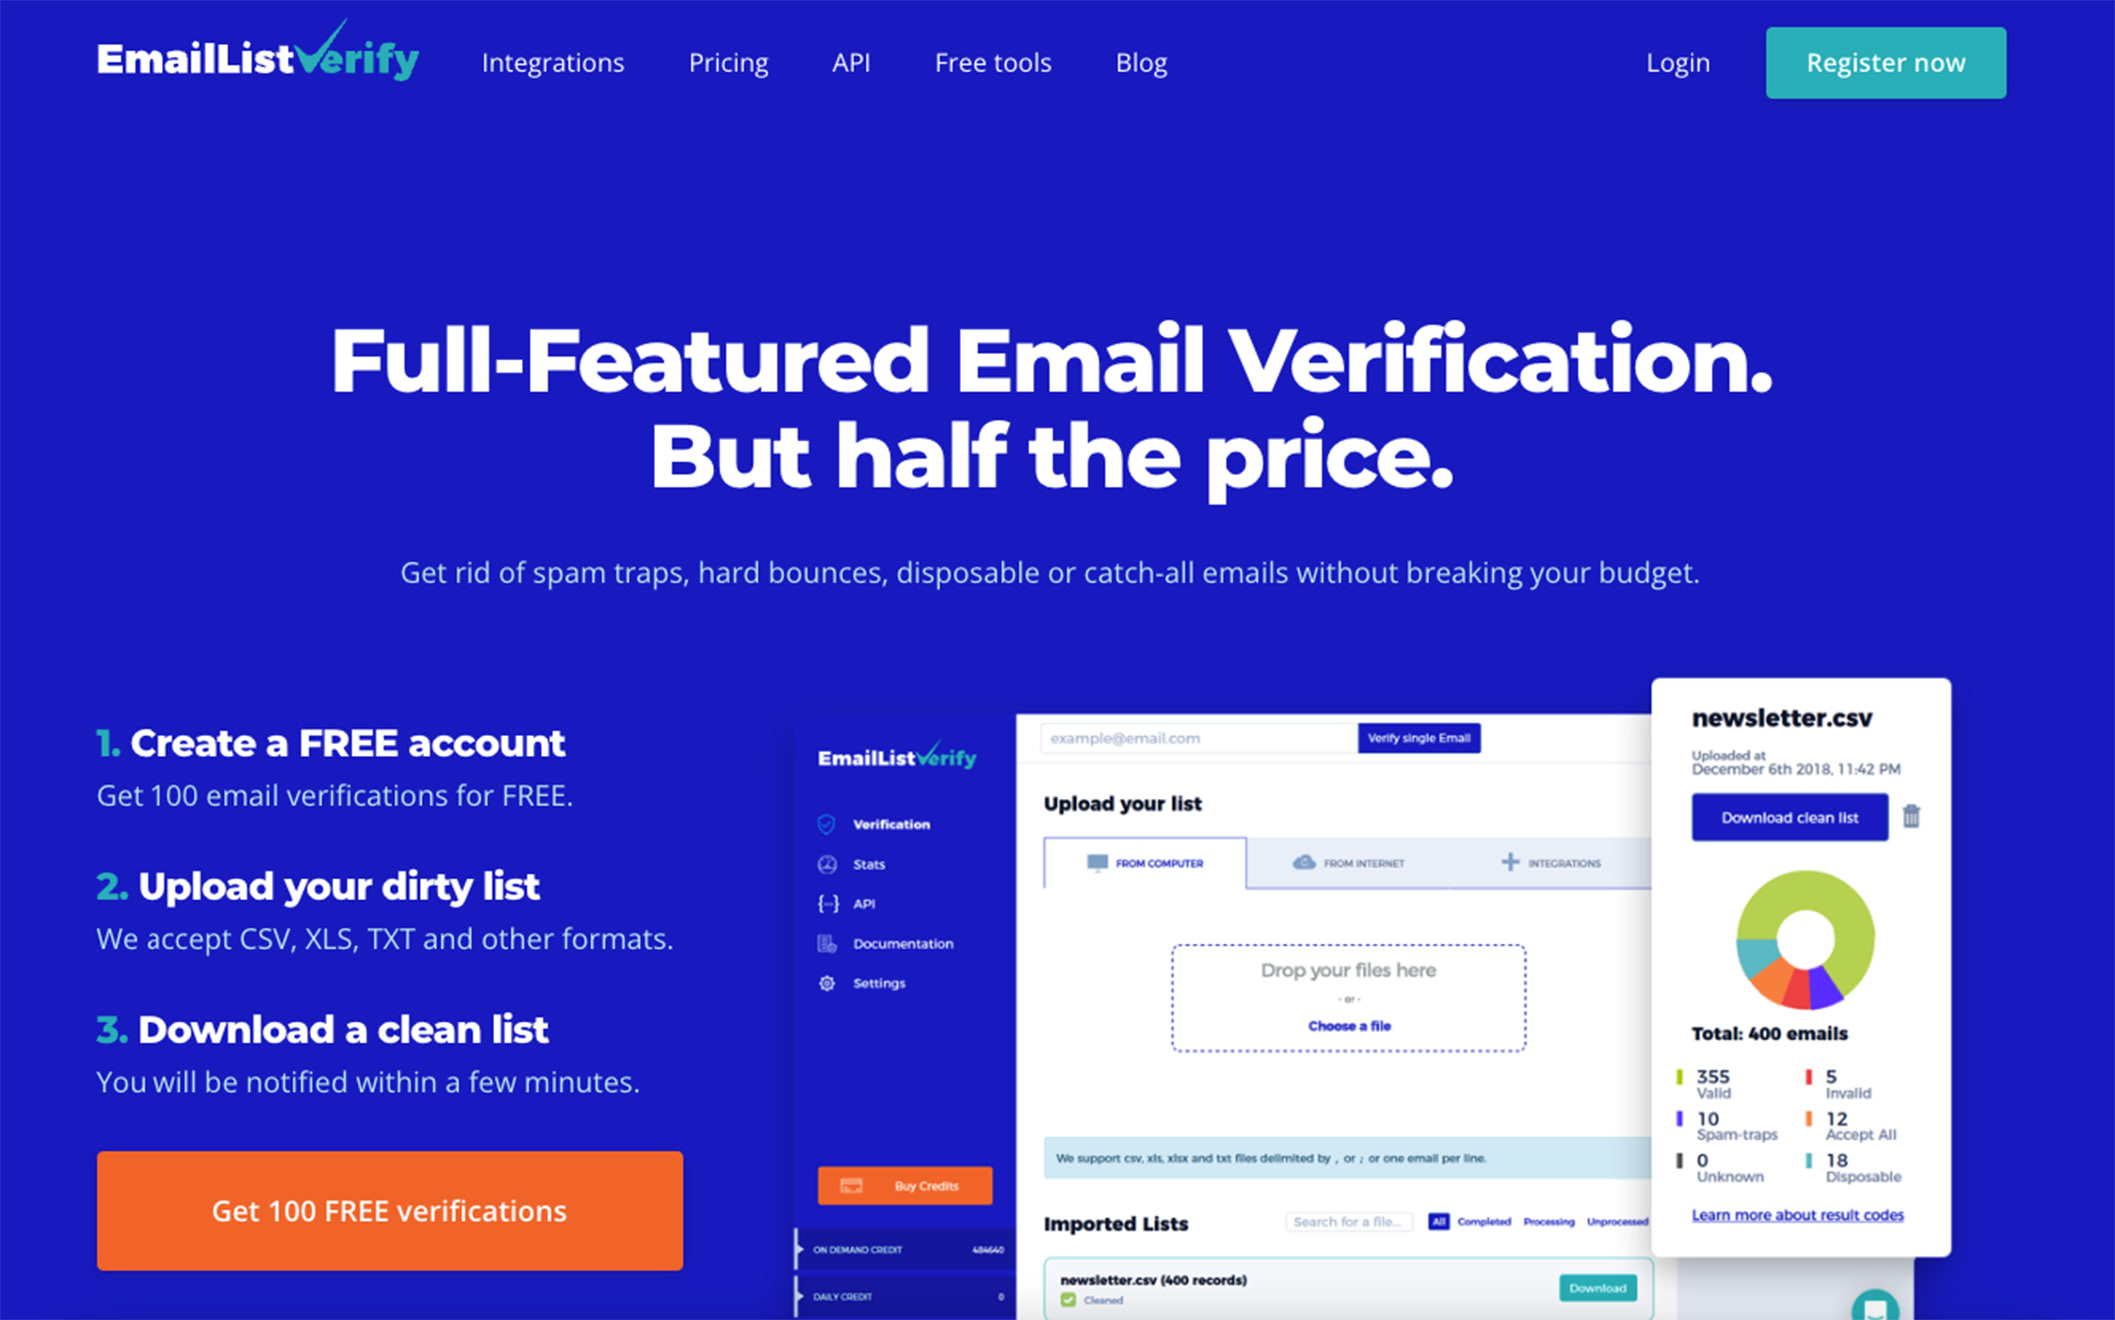 Email Checker and Verification Tools